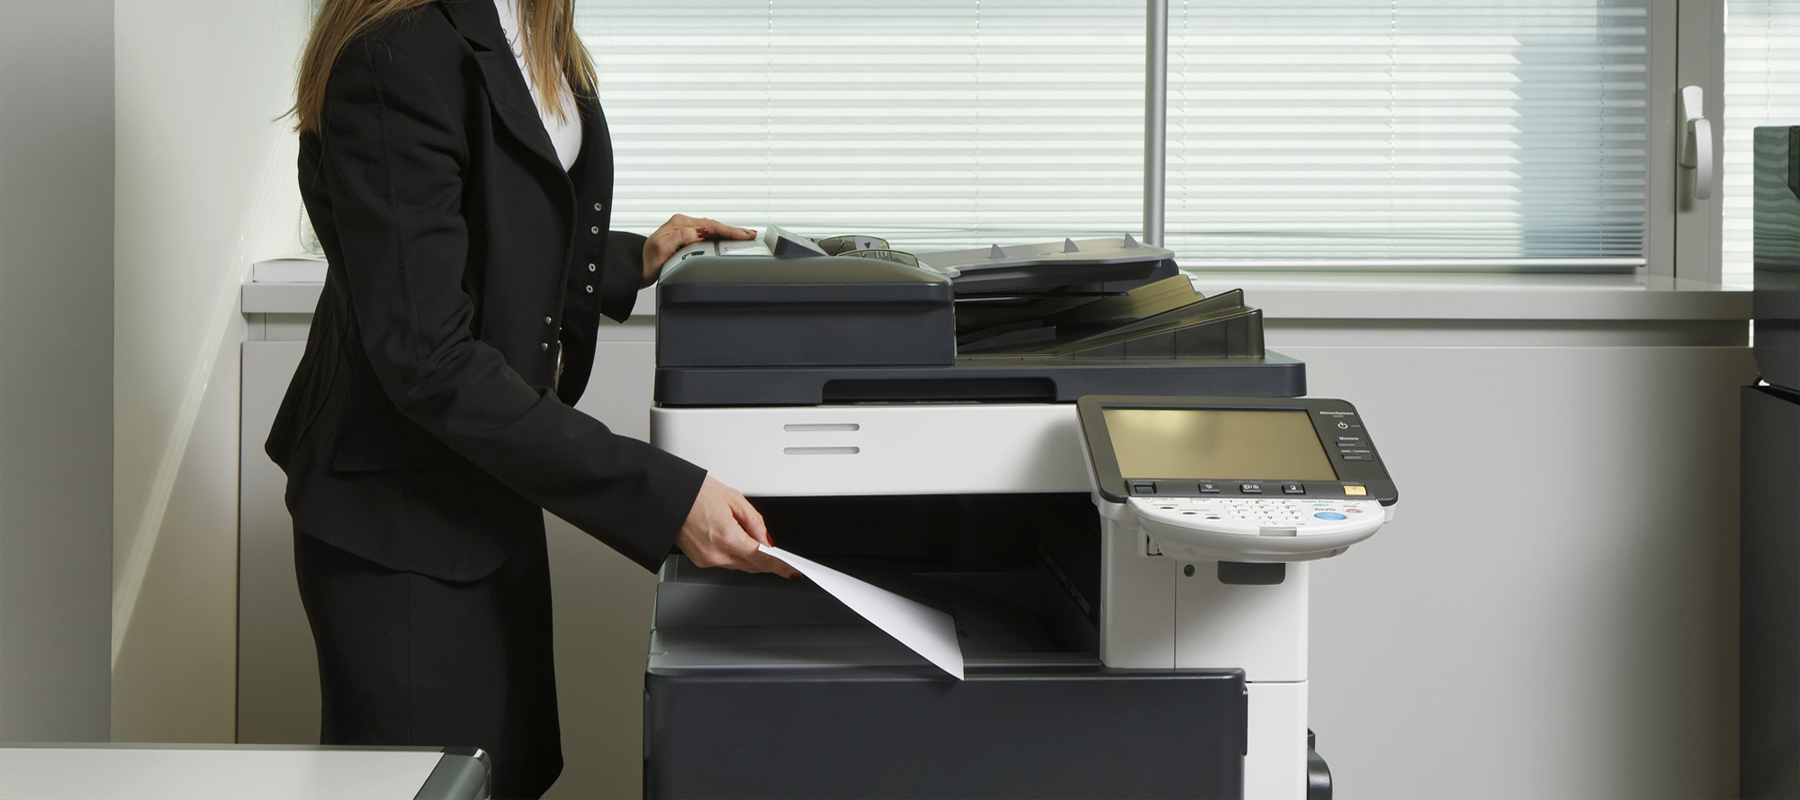 How Much Does a Printer Scanner Copier Cost?